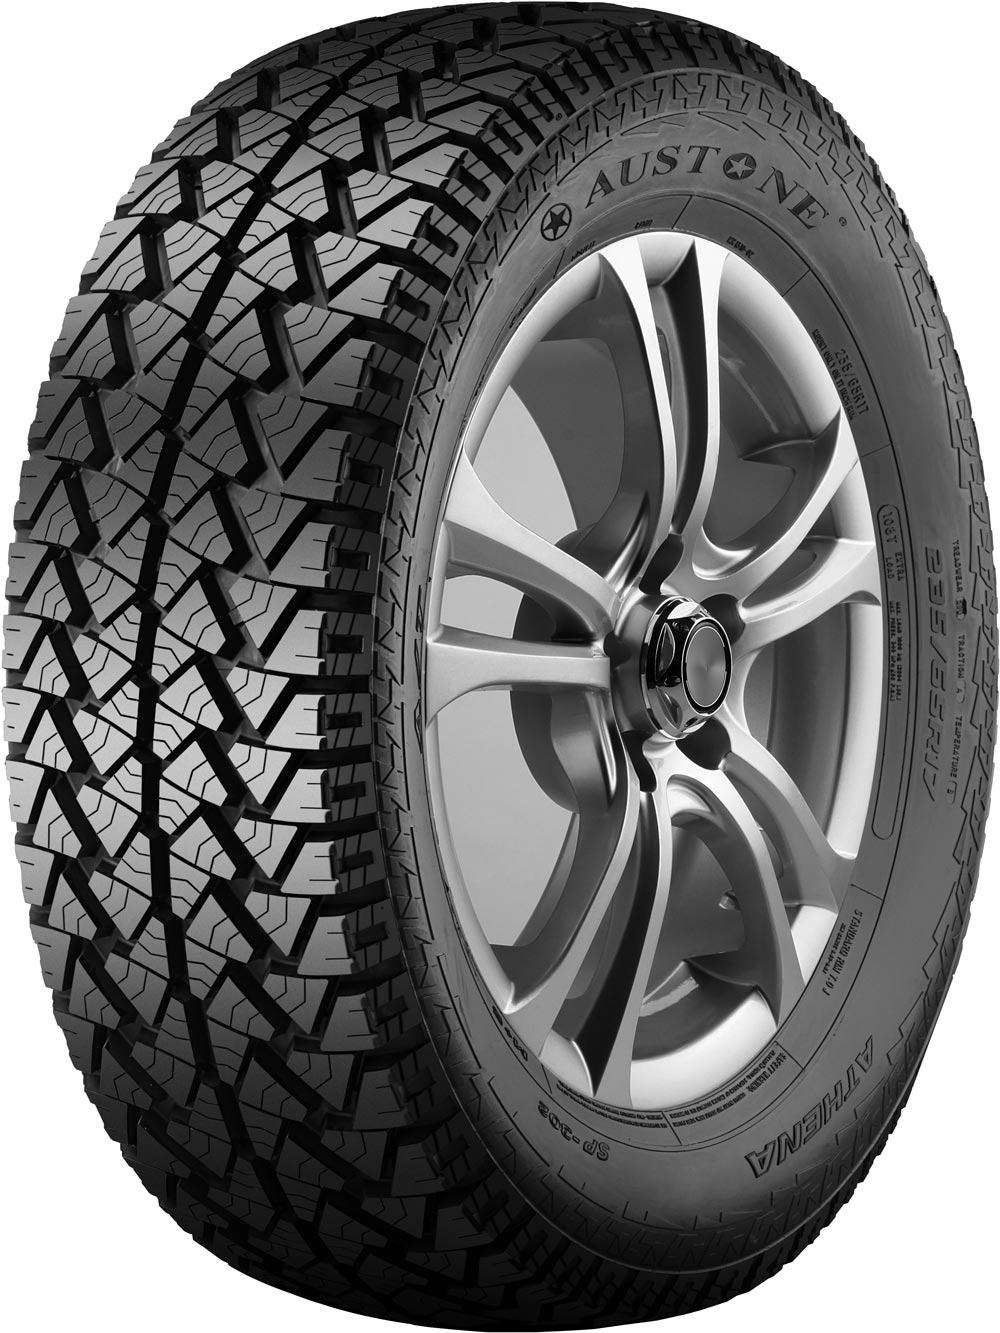 Anvelope jeep AUSTONE SP302 AT 205/70 R15 96H